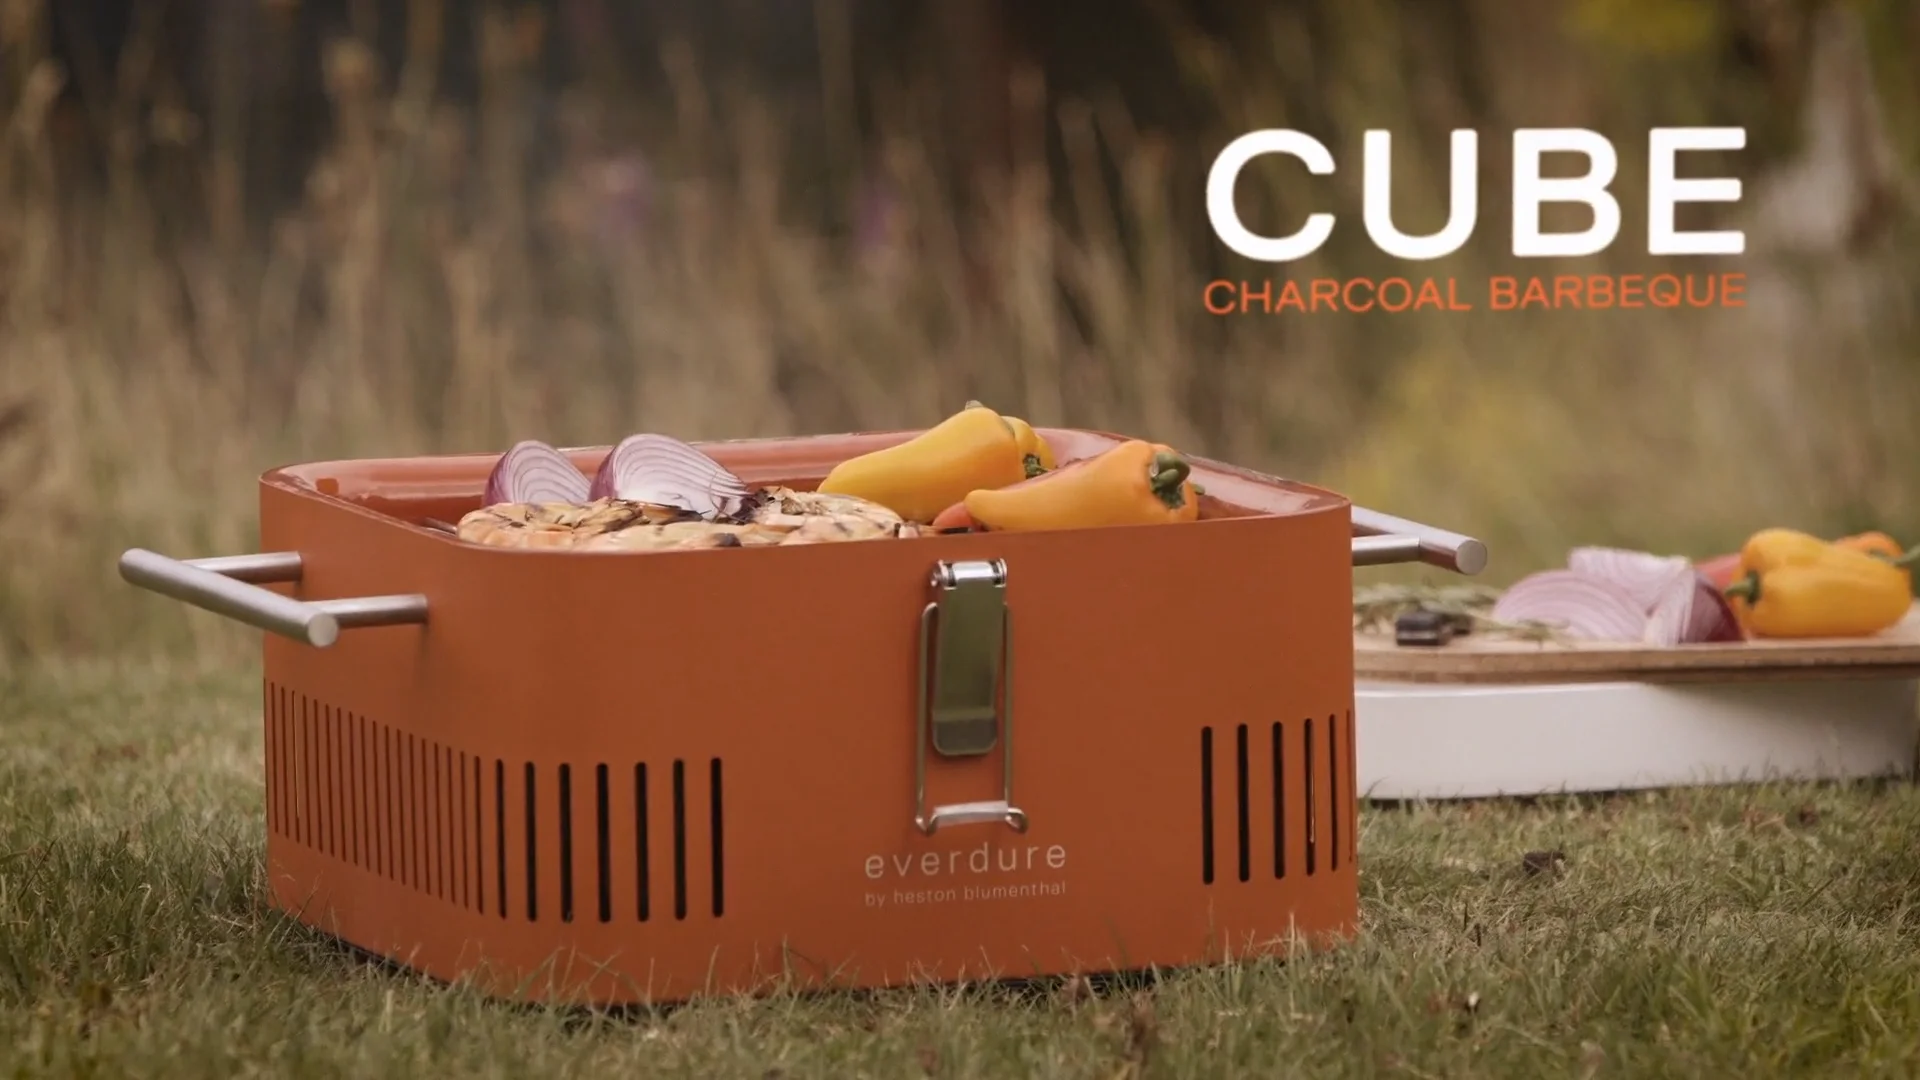 Everdure Cube by Heston Blumenthal Portable Charcoal Barbeque Grill